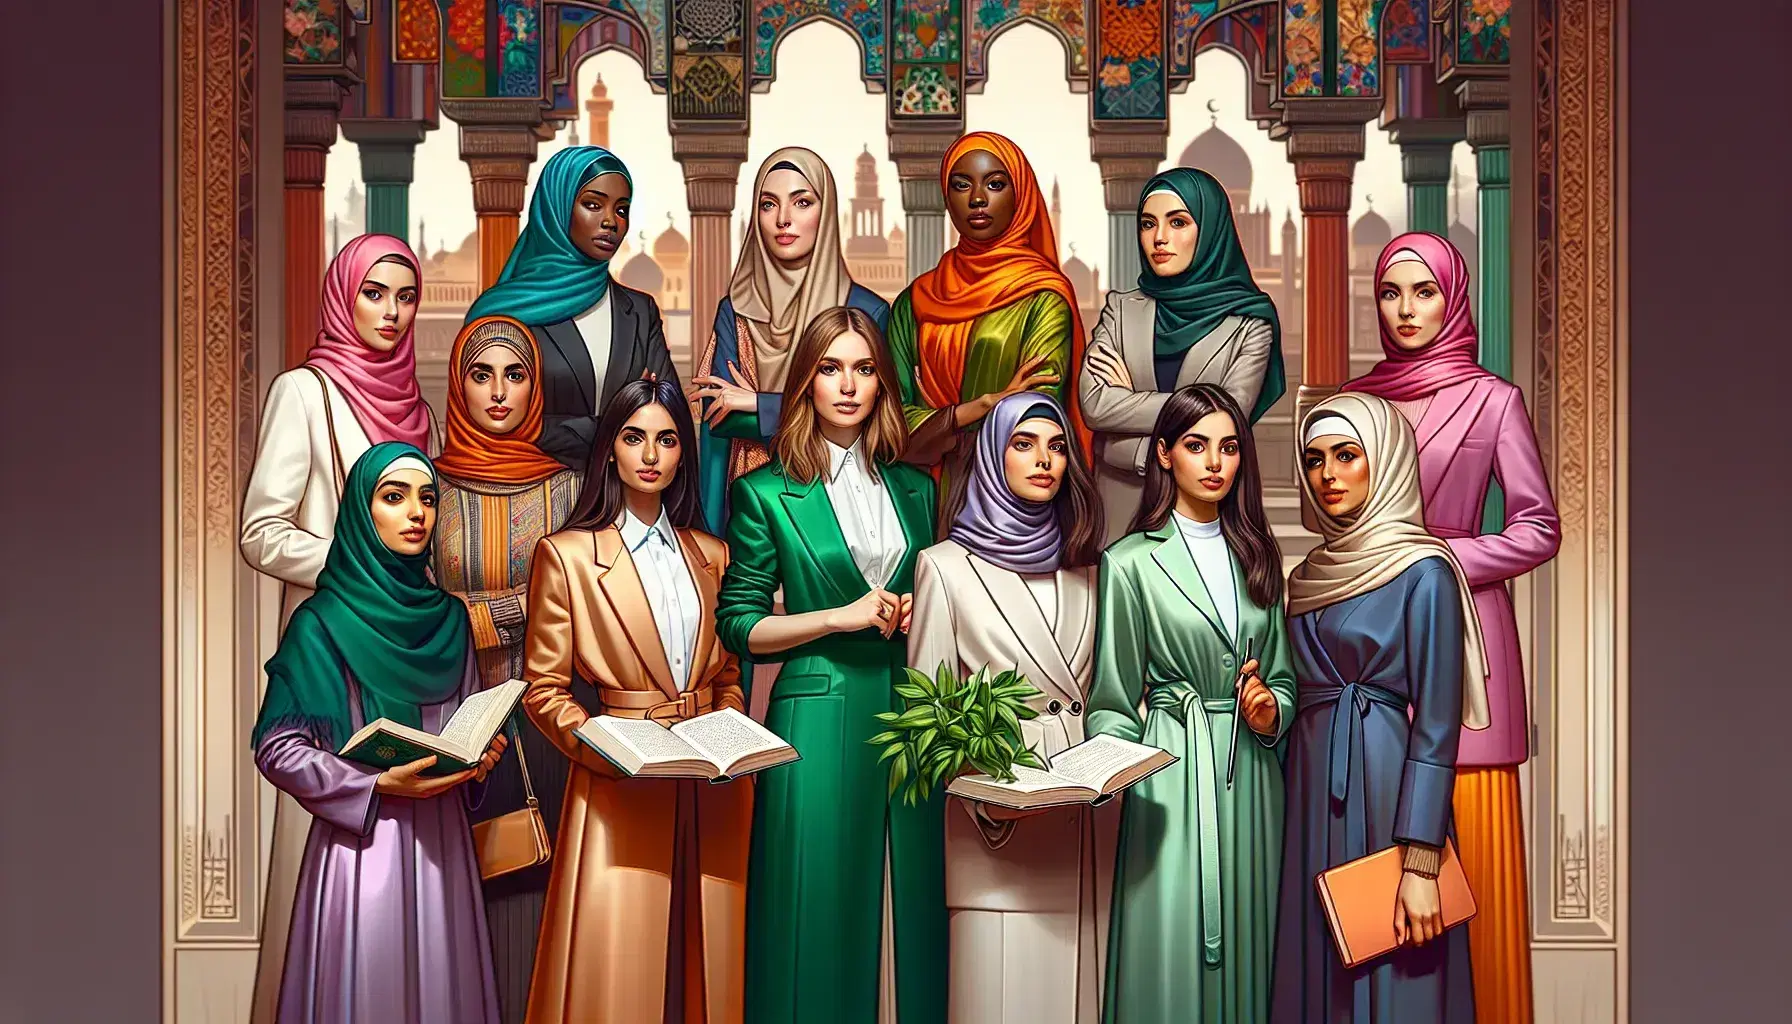 Diverse group of confident women, various ethnicities, in traditional and modern Islamic attire, holding symbols of education and growth, with an Islamic art backdrop.